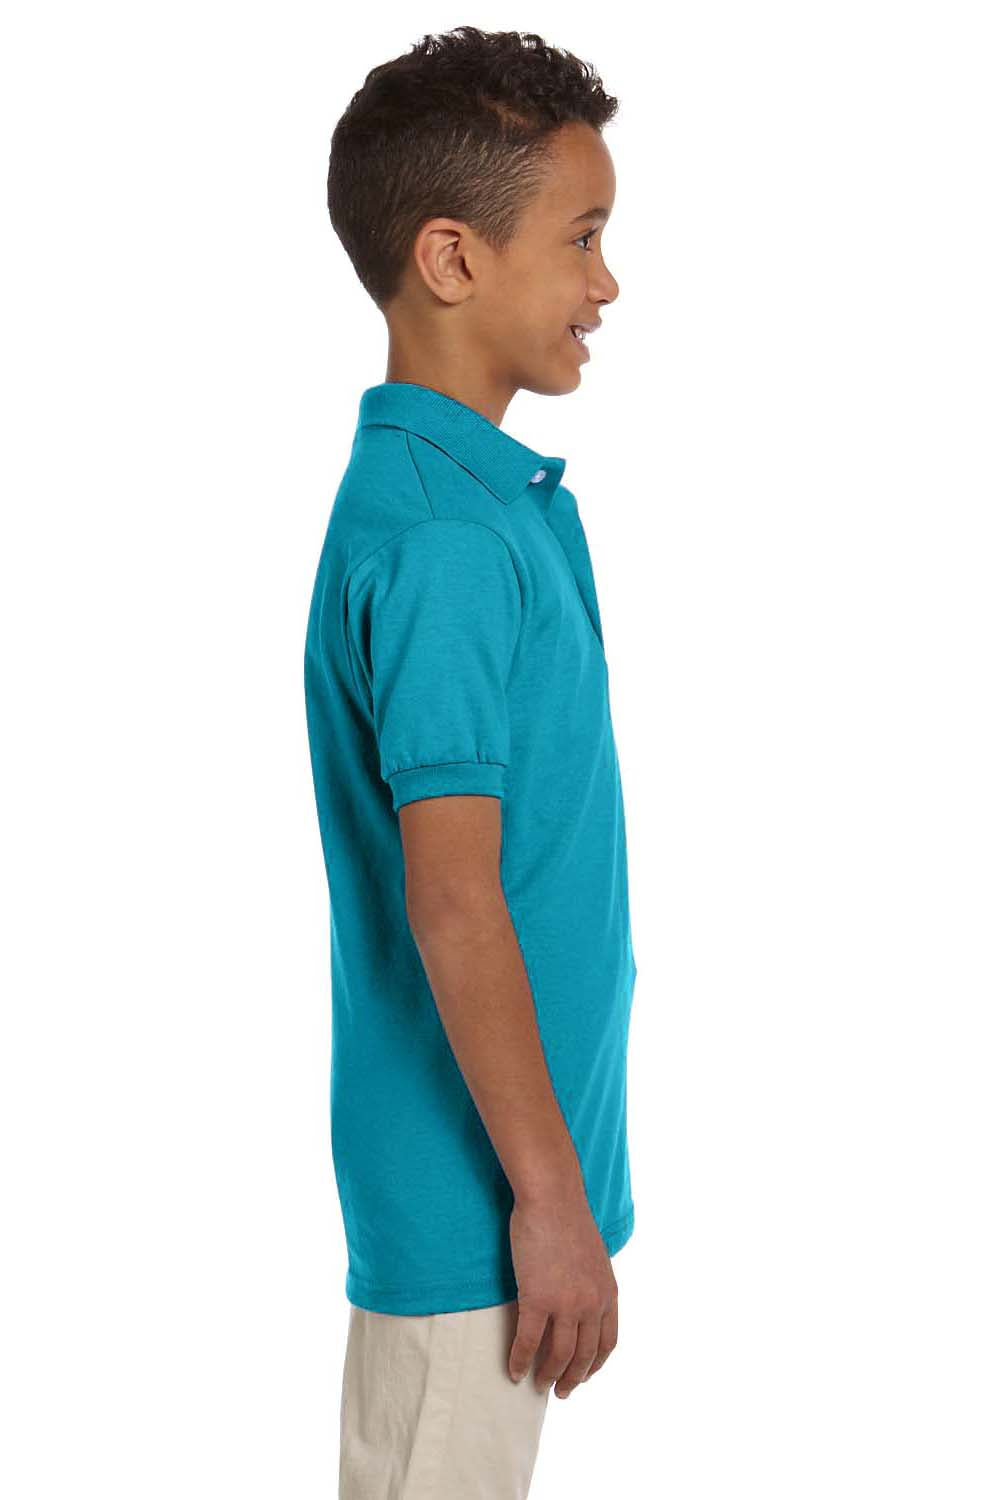 Jerzees 437Y Youth SpotShield Stain Resistant Short Sleeve Polo Shirt California Blue Side